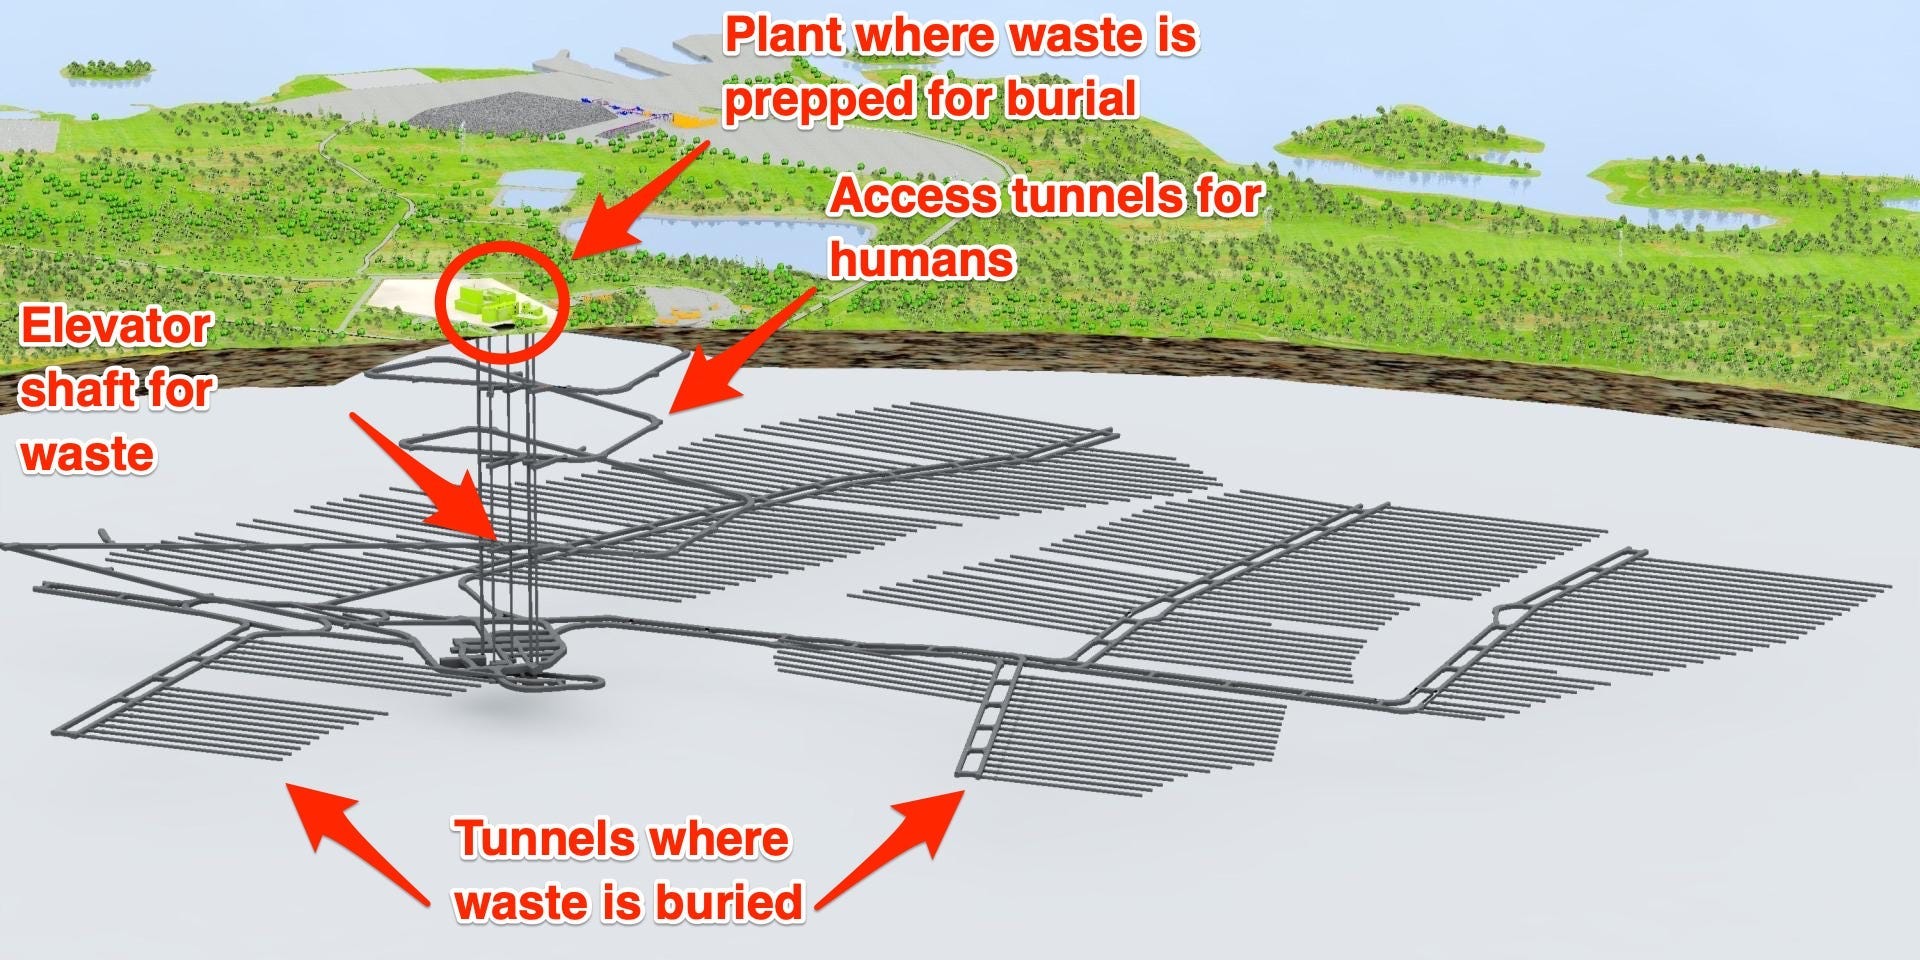 A schematic of Onkalo points to the Plant where the nuclear waste will be prepped for disposal, an elevator shaft, the human access tunnels, and the tunnels where the waste will be disposed.